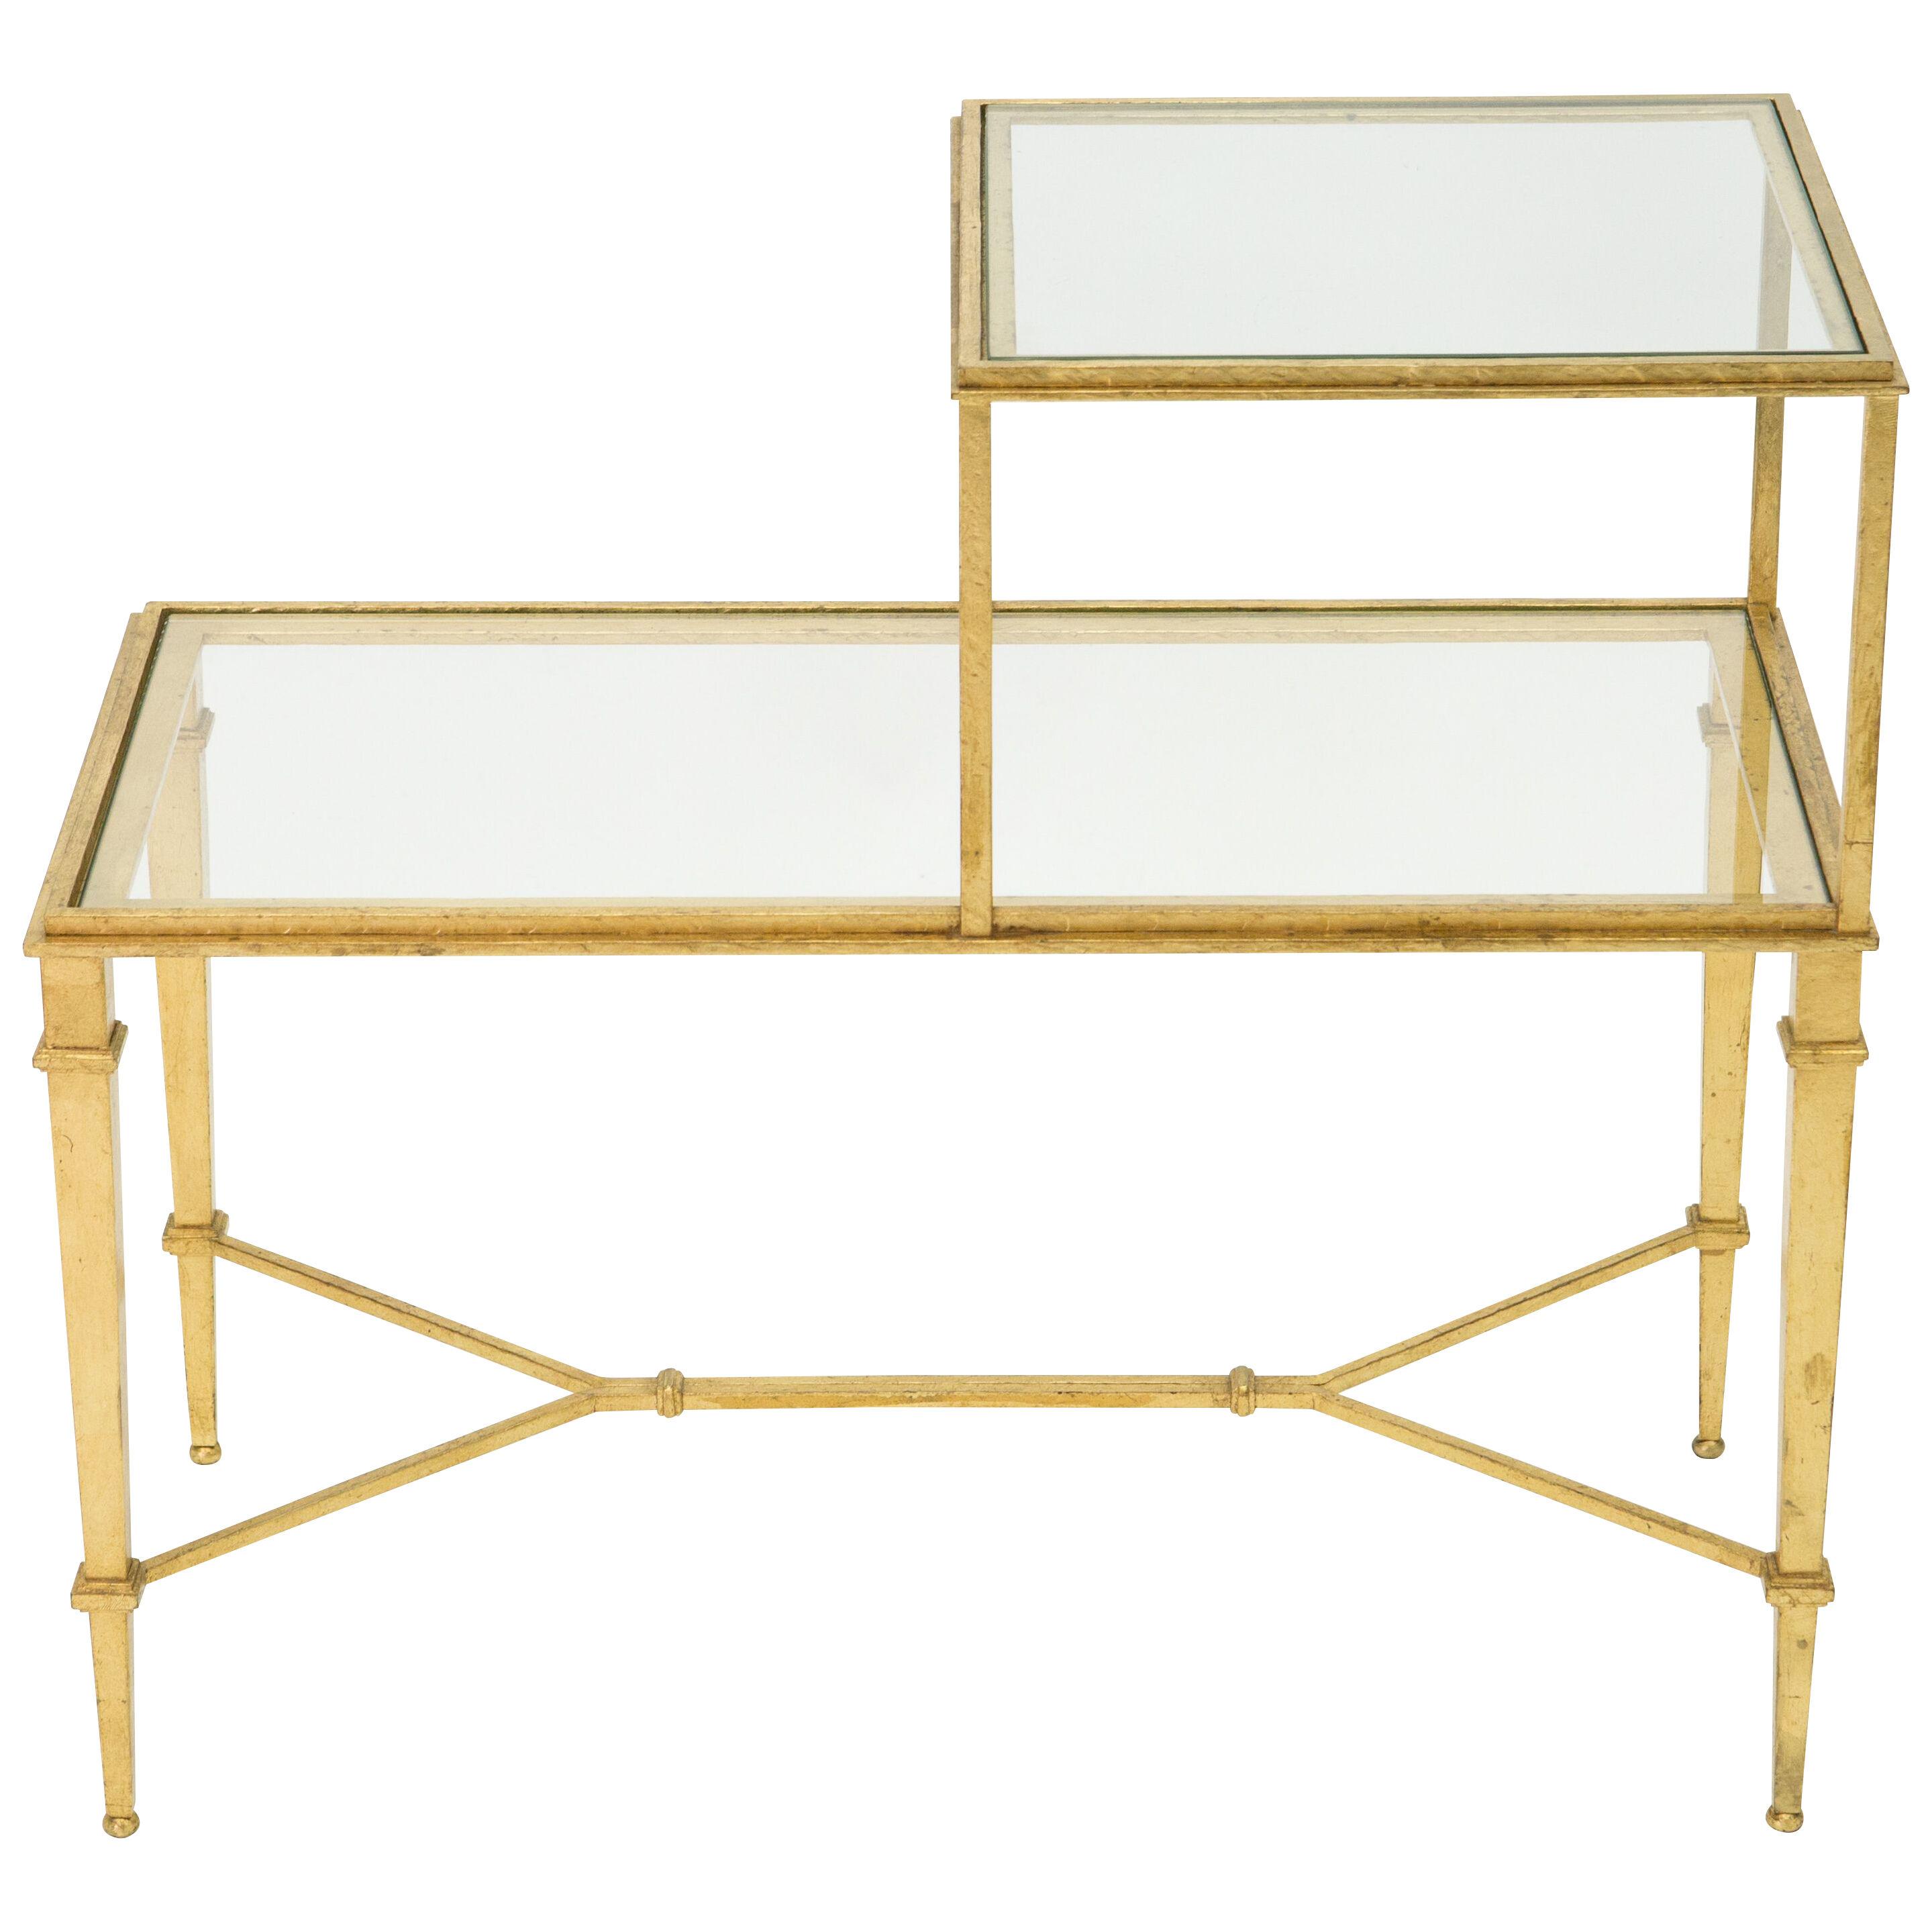 Roger Thibier Gilt Wrought Iron Glass Two-Tier End Table, 1960s